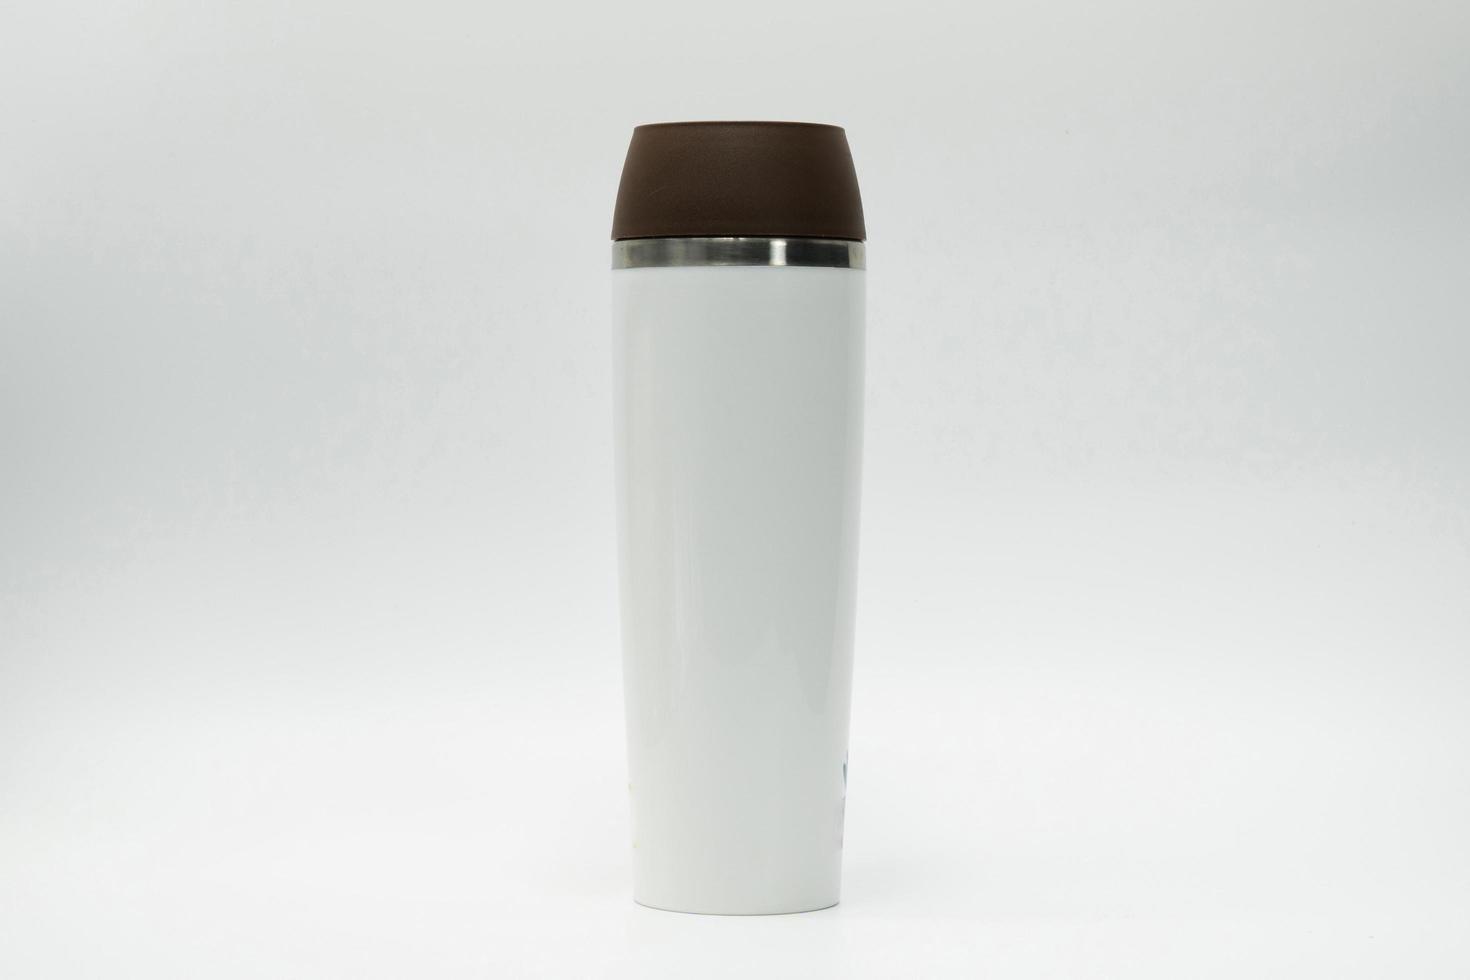 https://static.vecteezy.com/system/resources/previews/007/790/168/non_2x/thermos-bottle-isolated-on-white-background-coffee-or-tea-reusable-bottle-container-thermos-travel-tumbler-insulated-drink-container-white-stainless-steel-thermos-water-flask-zero-waste-free-photo.jpg